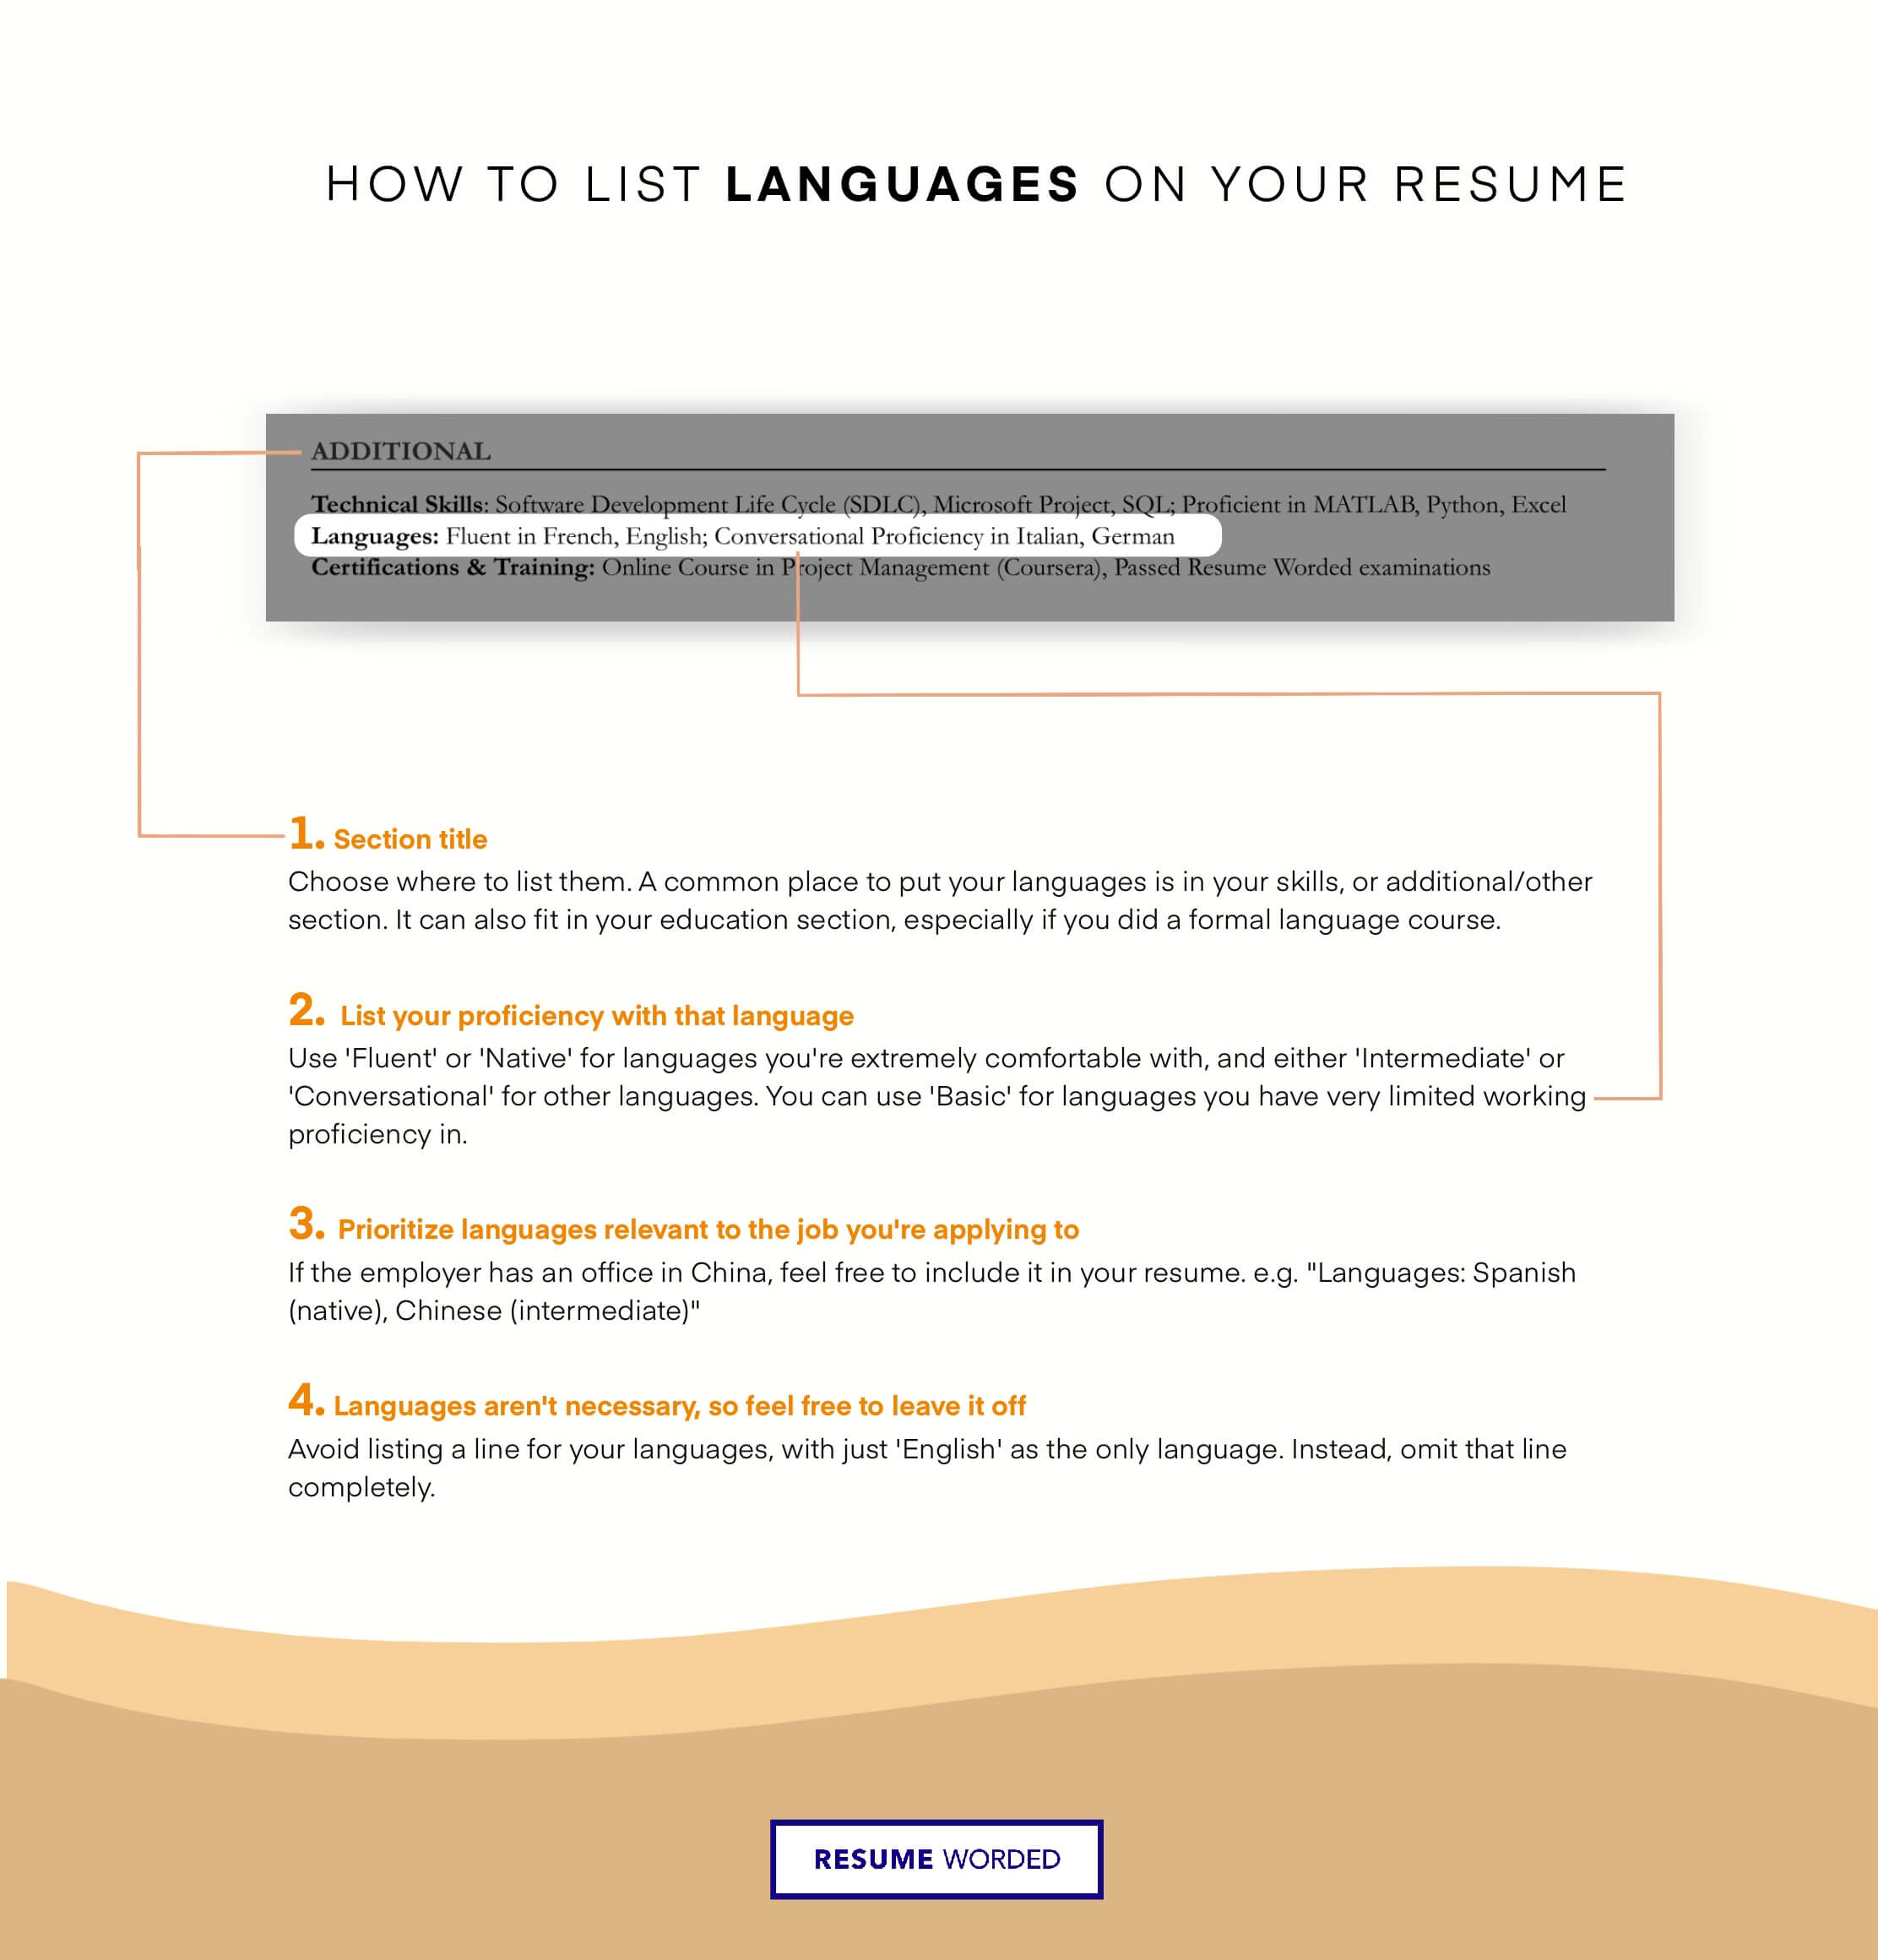 Include languages you speak. - Full Cycle Recruiter Resume